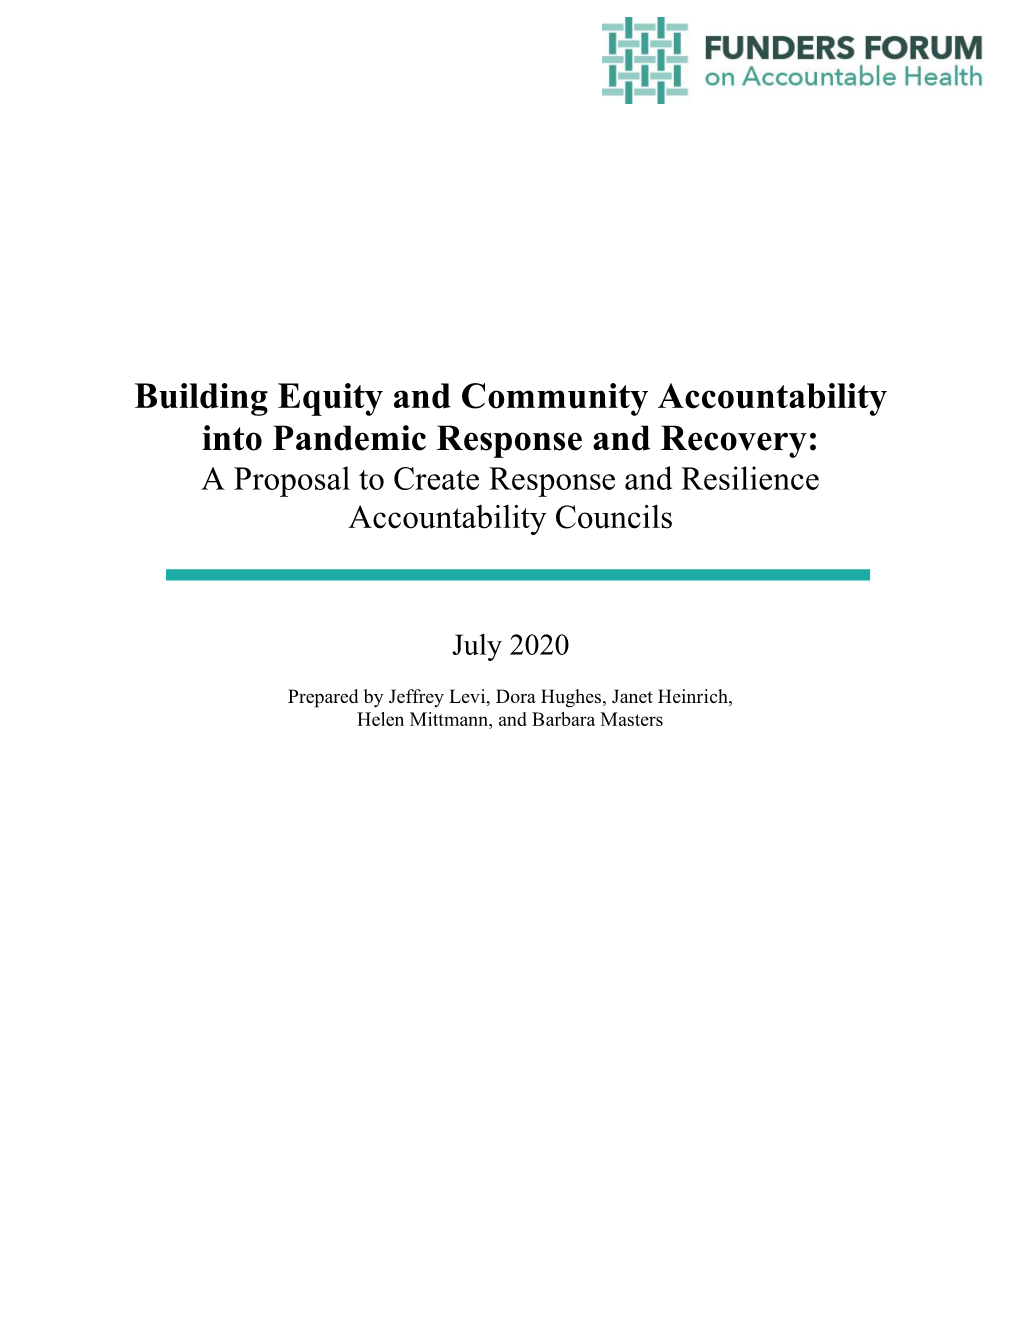 Building Equity and Community Accountability Into Pandemic Response and Recovery: a Proposal to Create Response and Resilience Accountability Councils